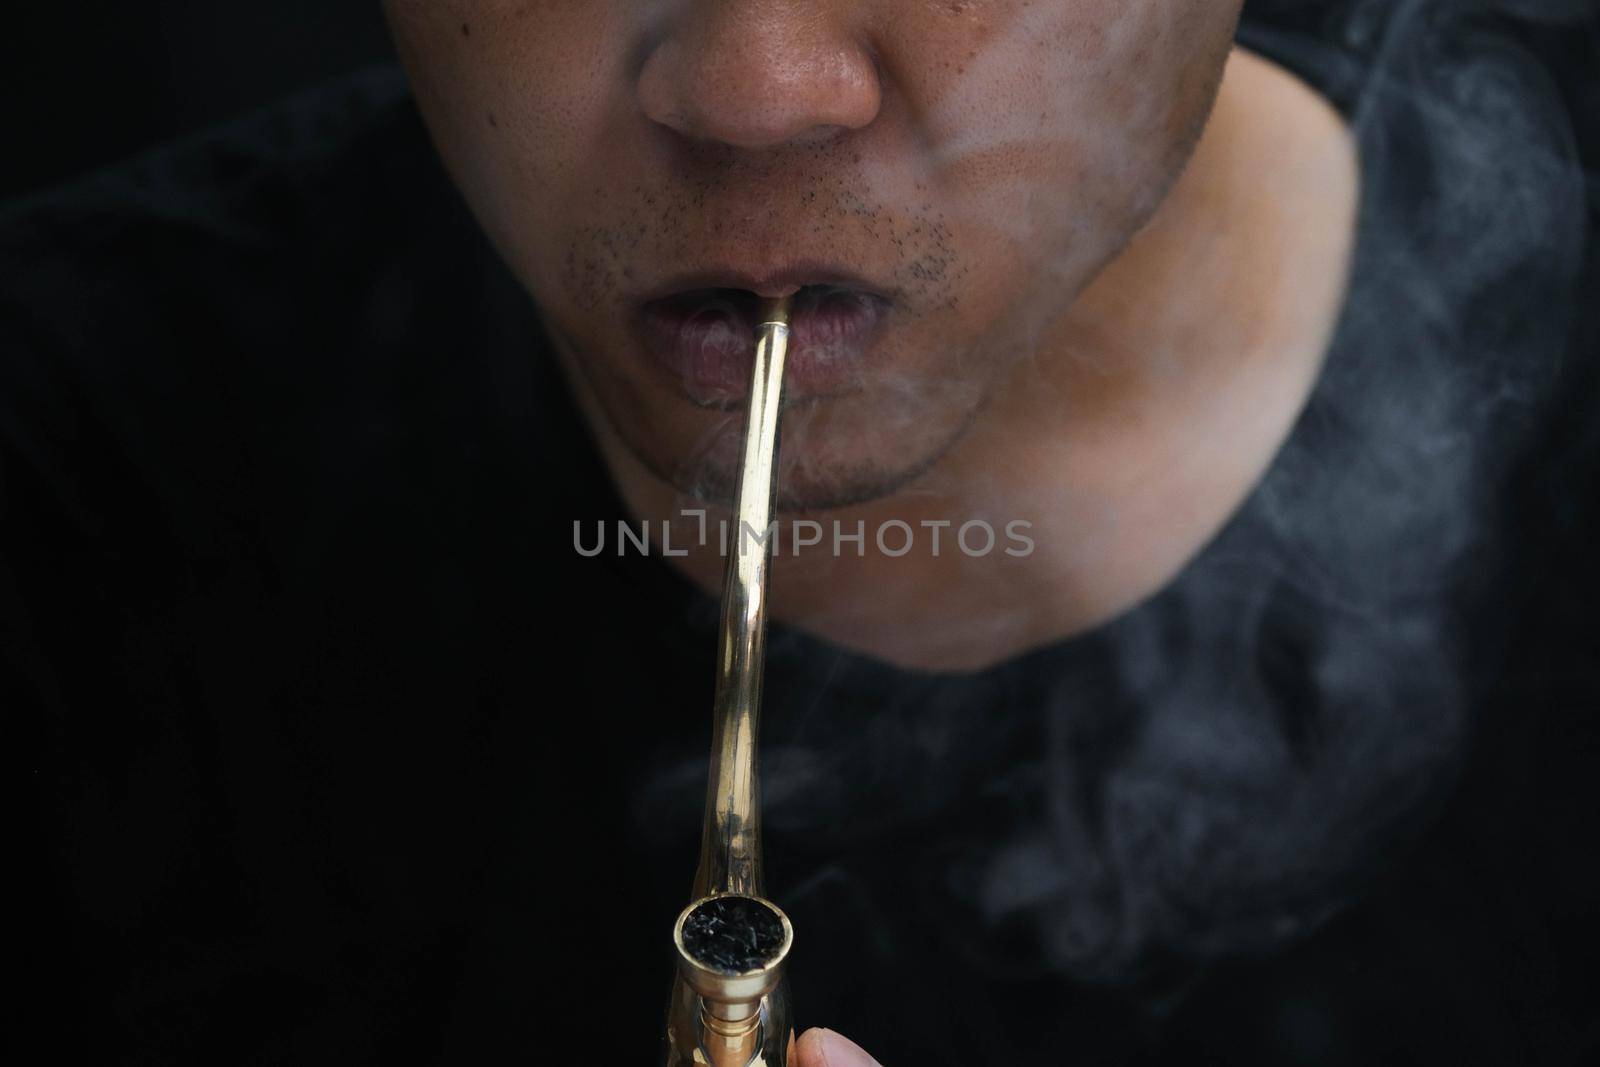 Asian man smokes marijuana from a pipe at home. Studio shoot with model simulating smoking pot with a pipe in a dark background. Cannabis legalisation. by TEERASAK